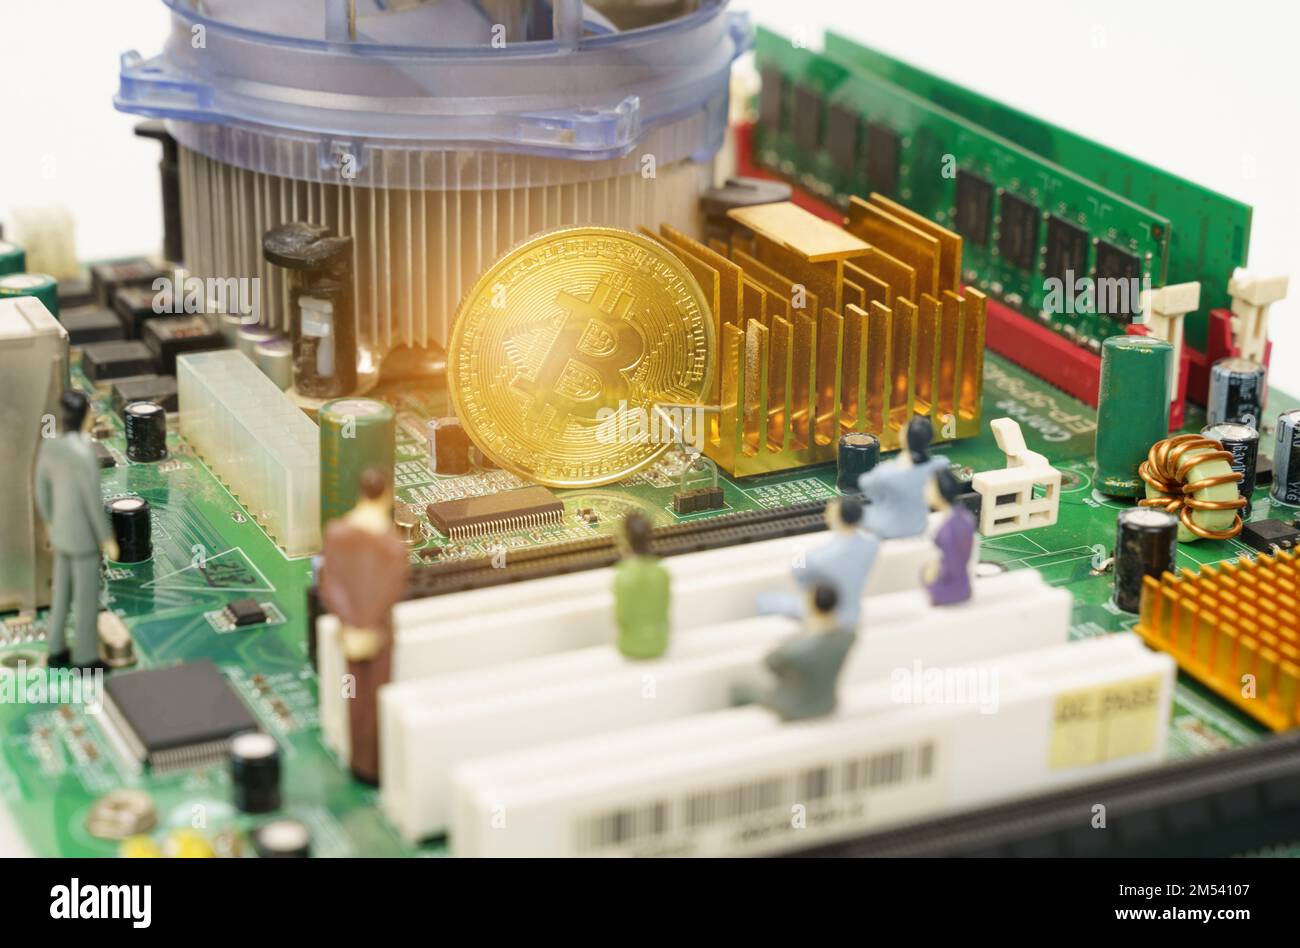 Business and technology concept. On the motherboard of the computer is a gold bitcoin coin and miniature figures of people. Figures out of focus. Stock Photo